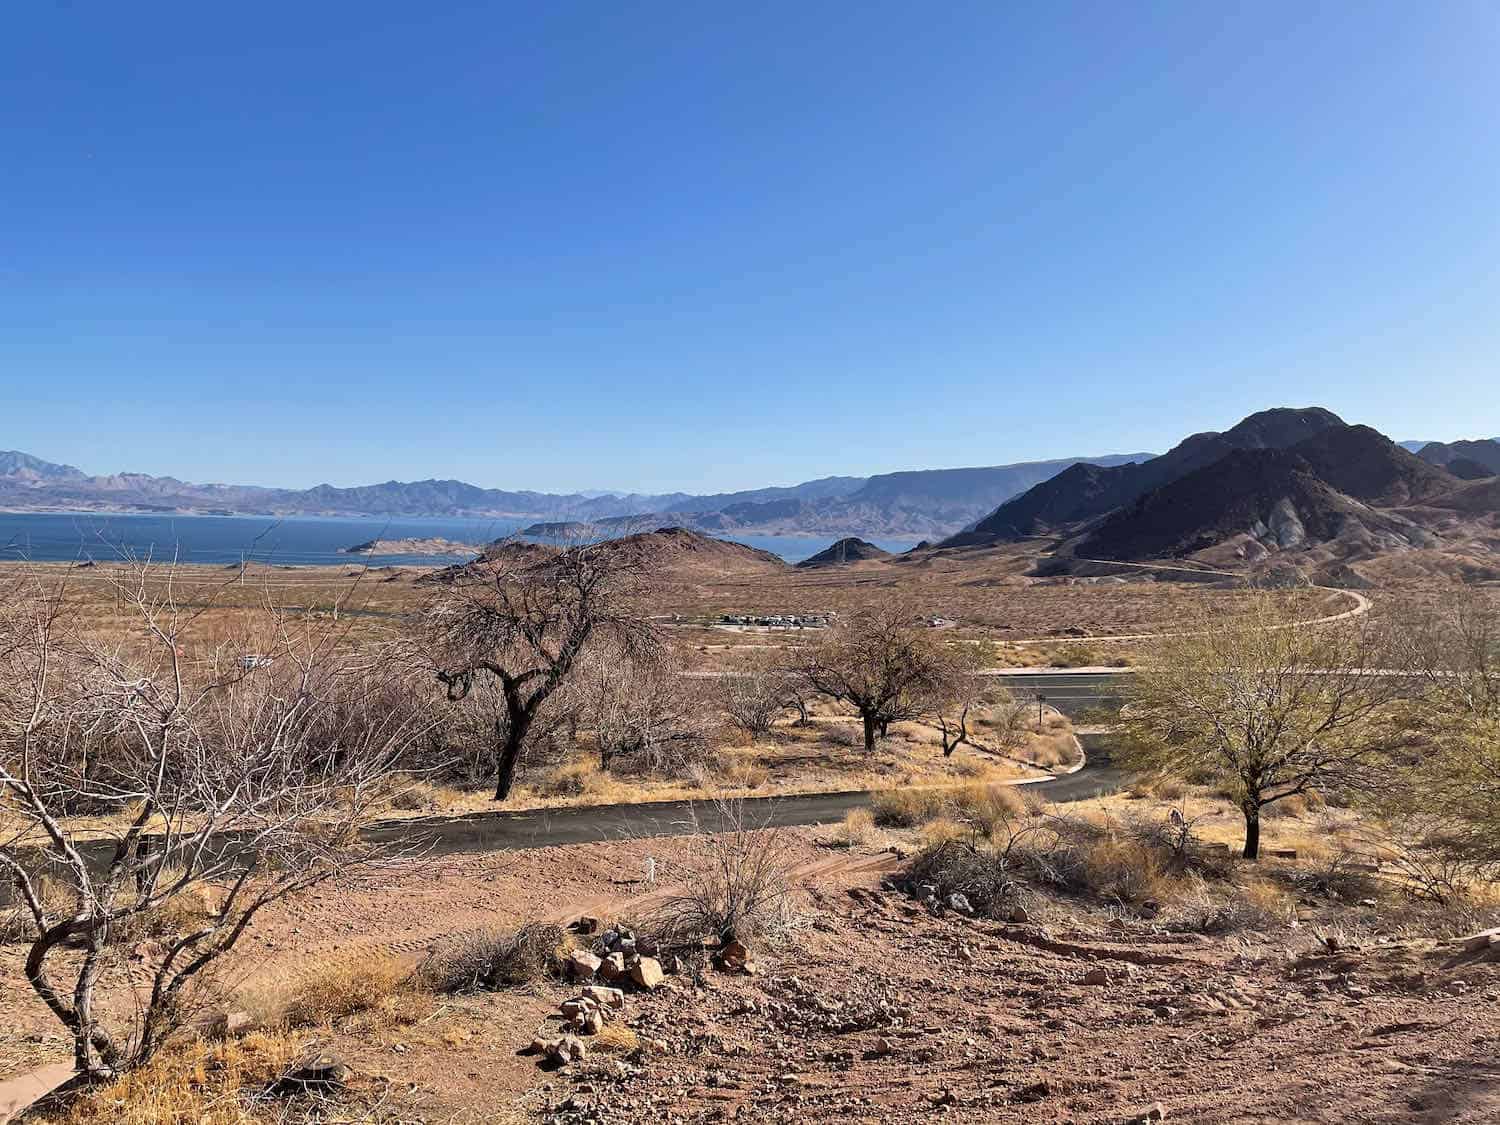 The high desert populated by a few scraggly trees at Lake Mead National Recreation Area.